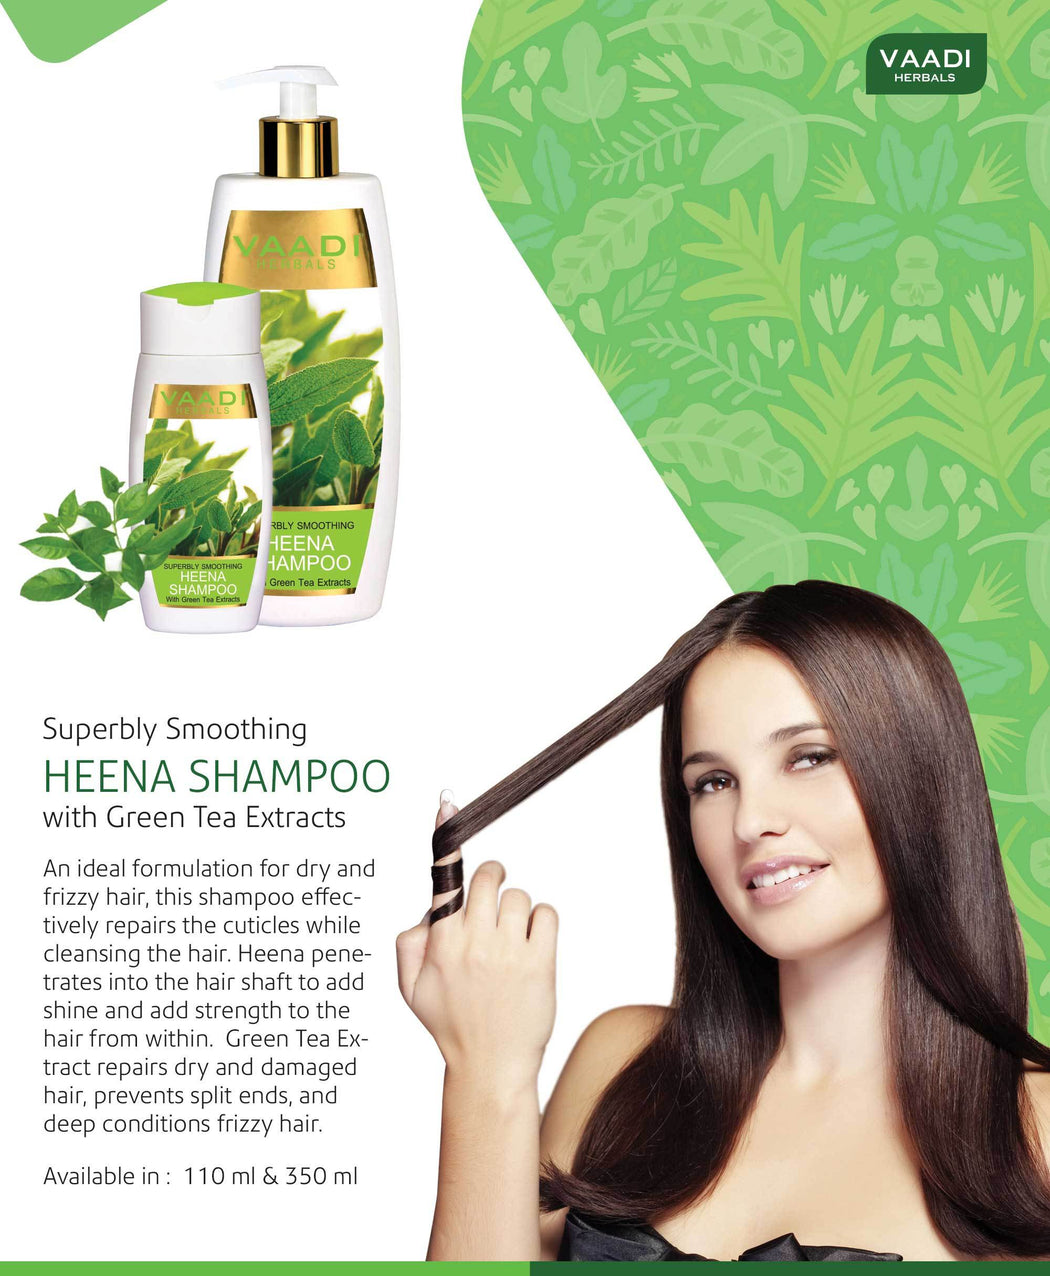 Superbly Smoothing Organic Heena Shampoo with Green Tea Extract - Controls Dry Frizzy Hair - Strengthens Hair (3 x 110 ml/4 fl oz)